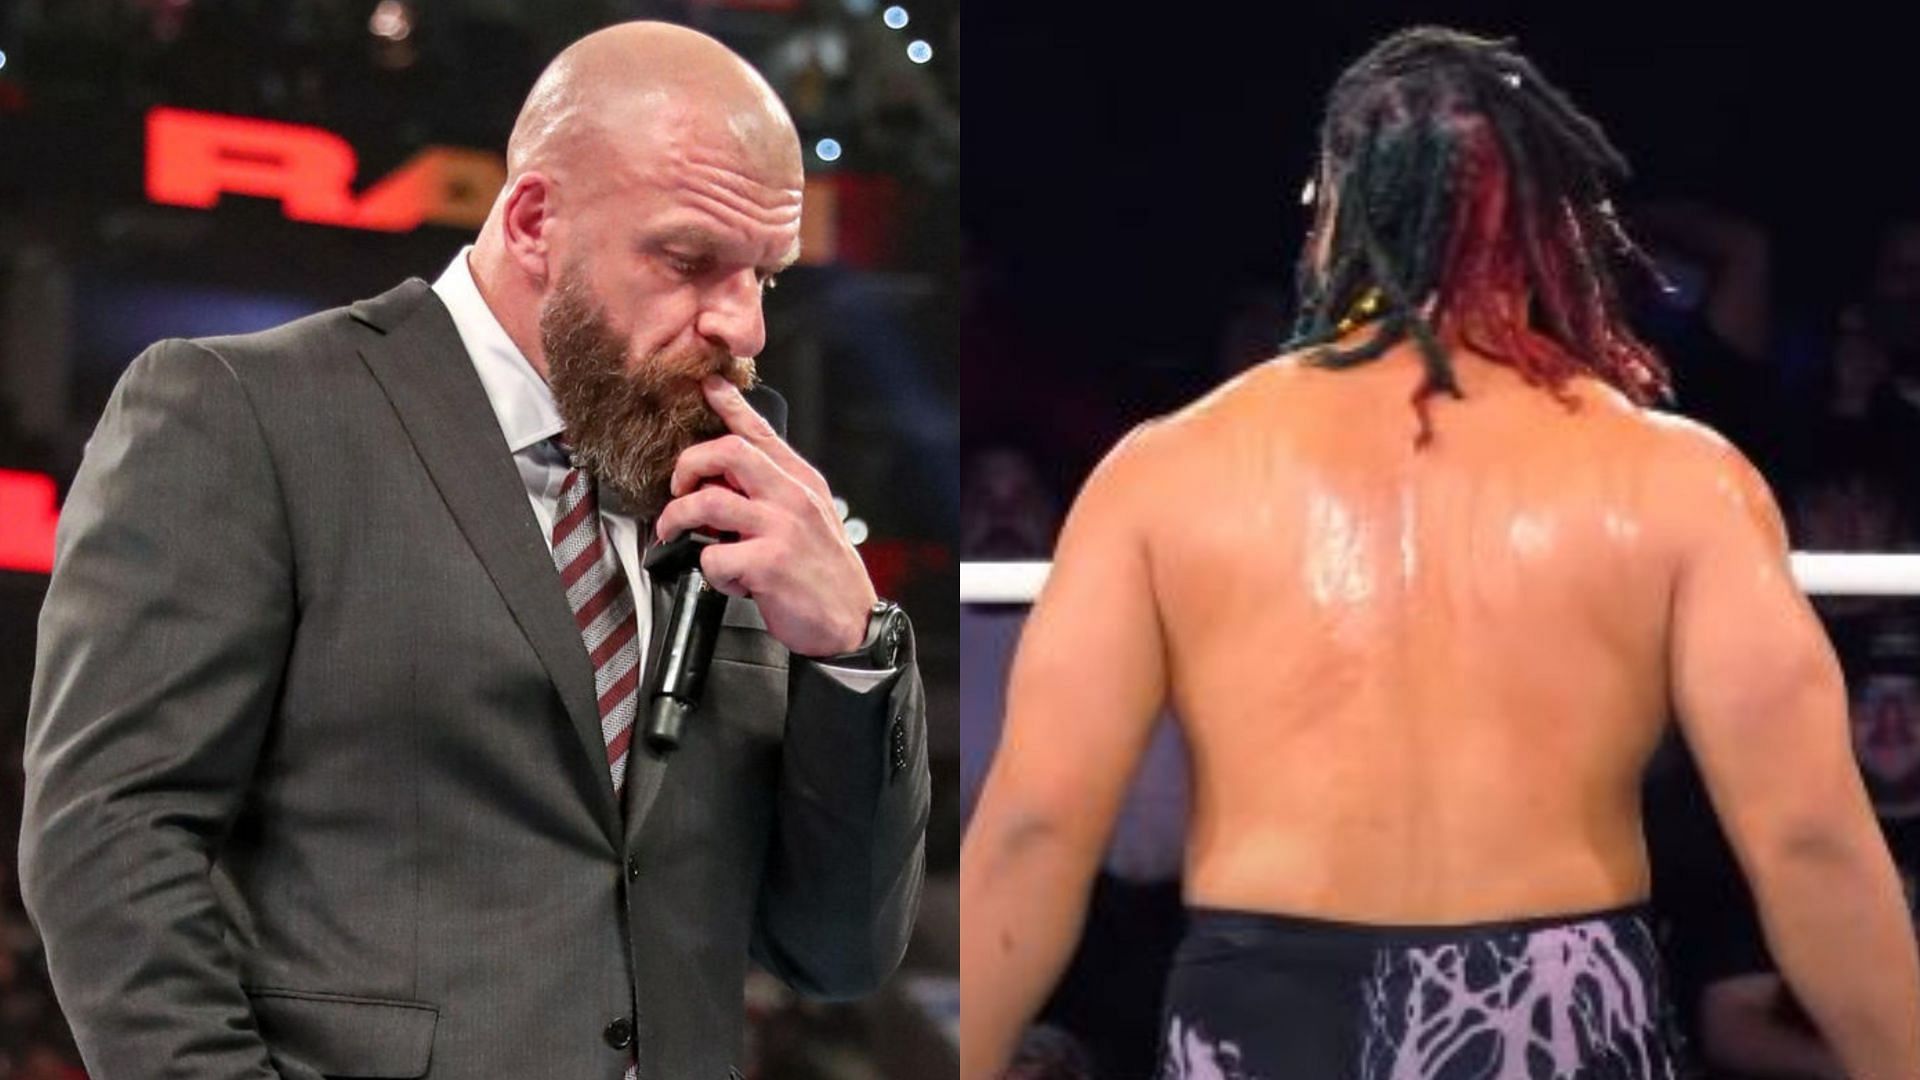 WWE Chief Content Officer Triple H (left) and Jacob Fatu (right)